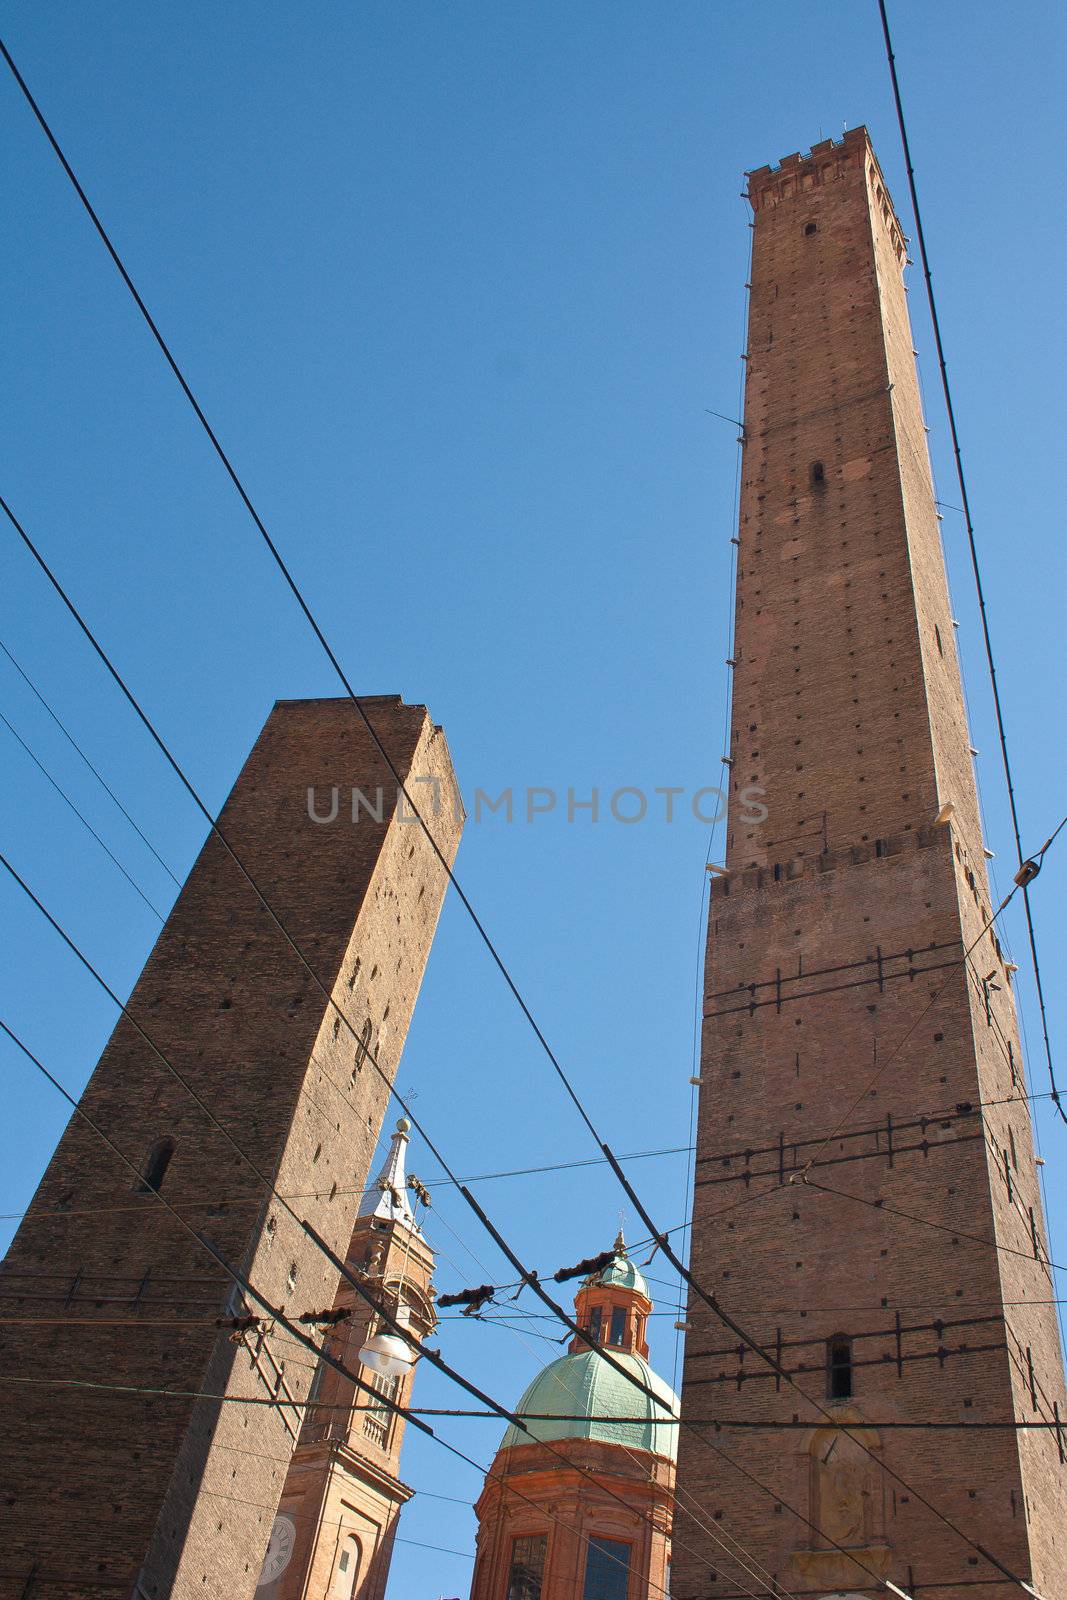 two towers - bologna by minoandriani